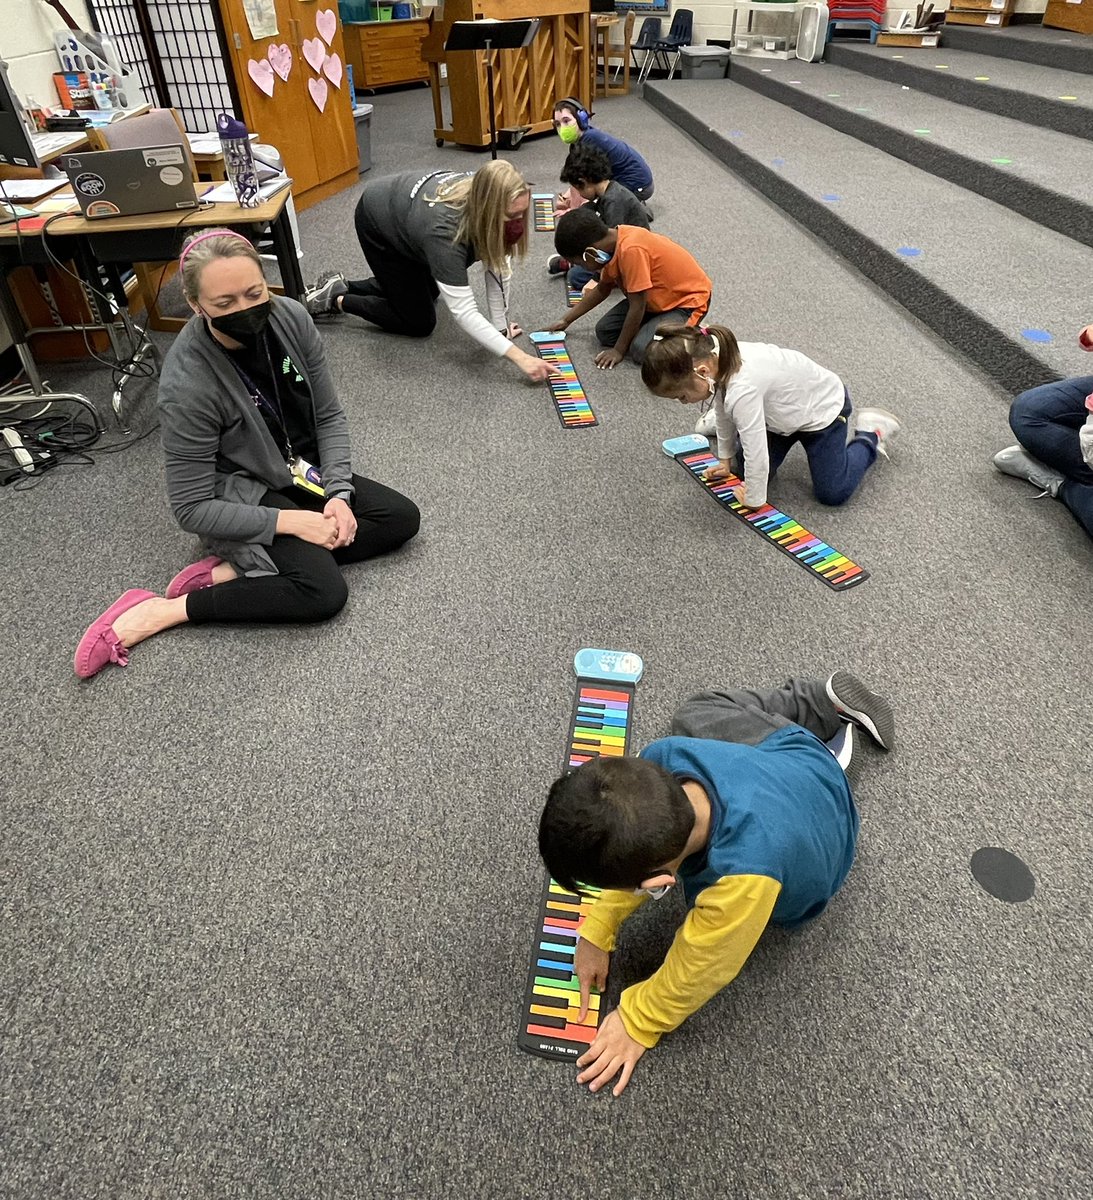 Music is always magical with @MrsBerraMusic and @AngYoung77. Thank you for bringing out these new roll-up pianos 🎹 that our @wsfox students had so much fun playing. #WillowPride